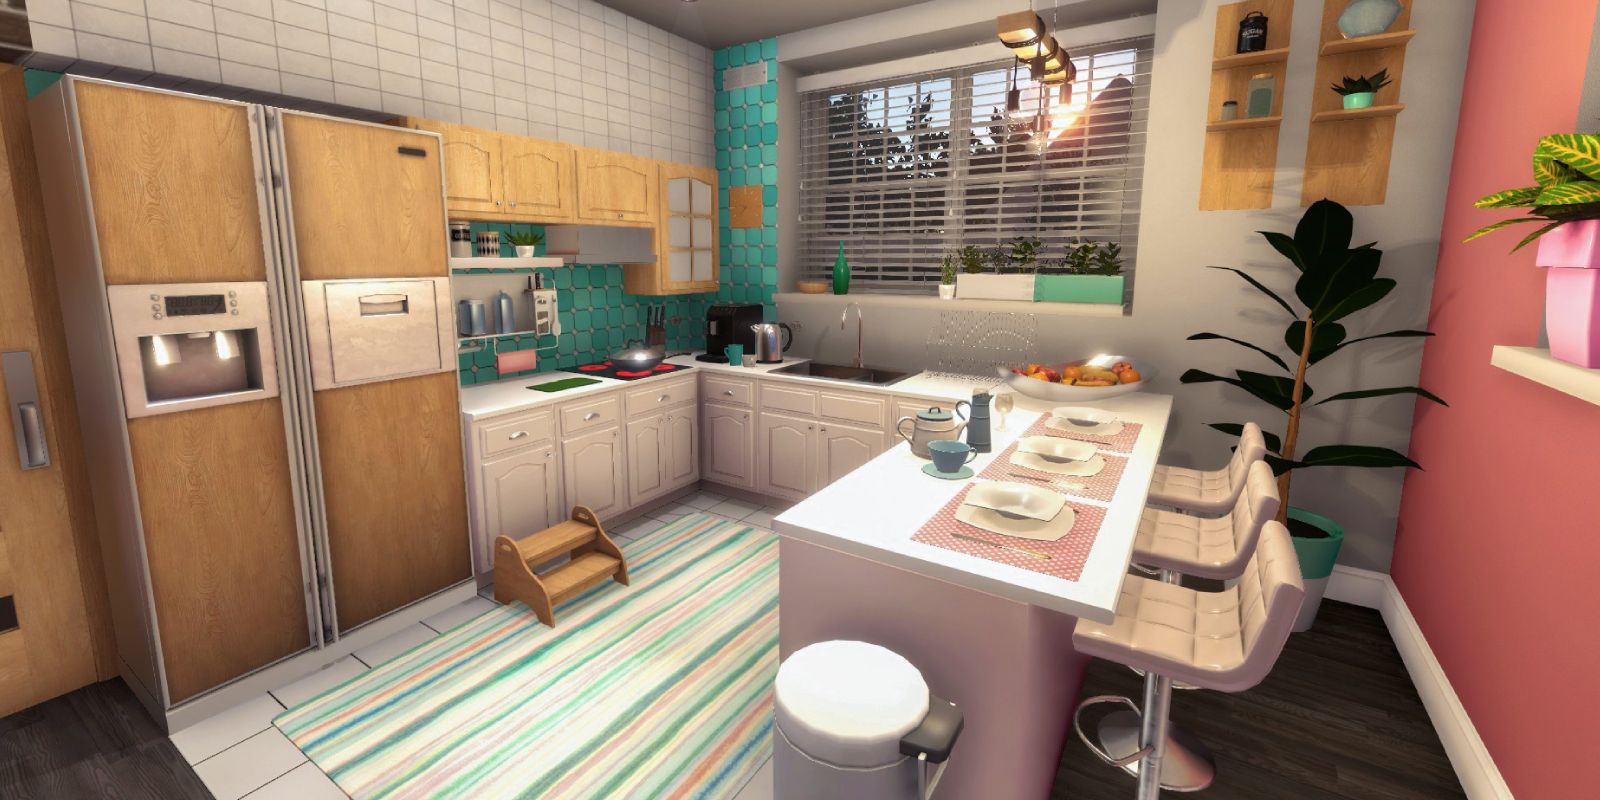 A renovated kitchen in House Flipper